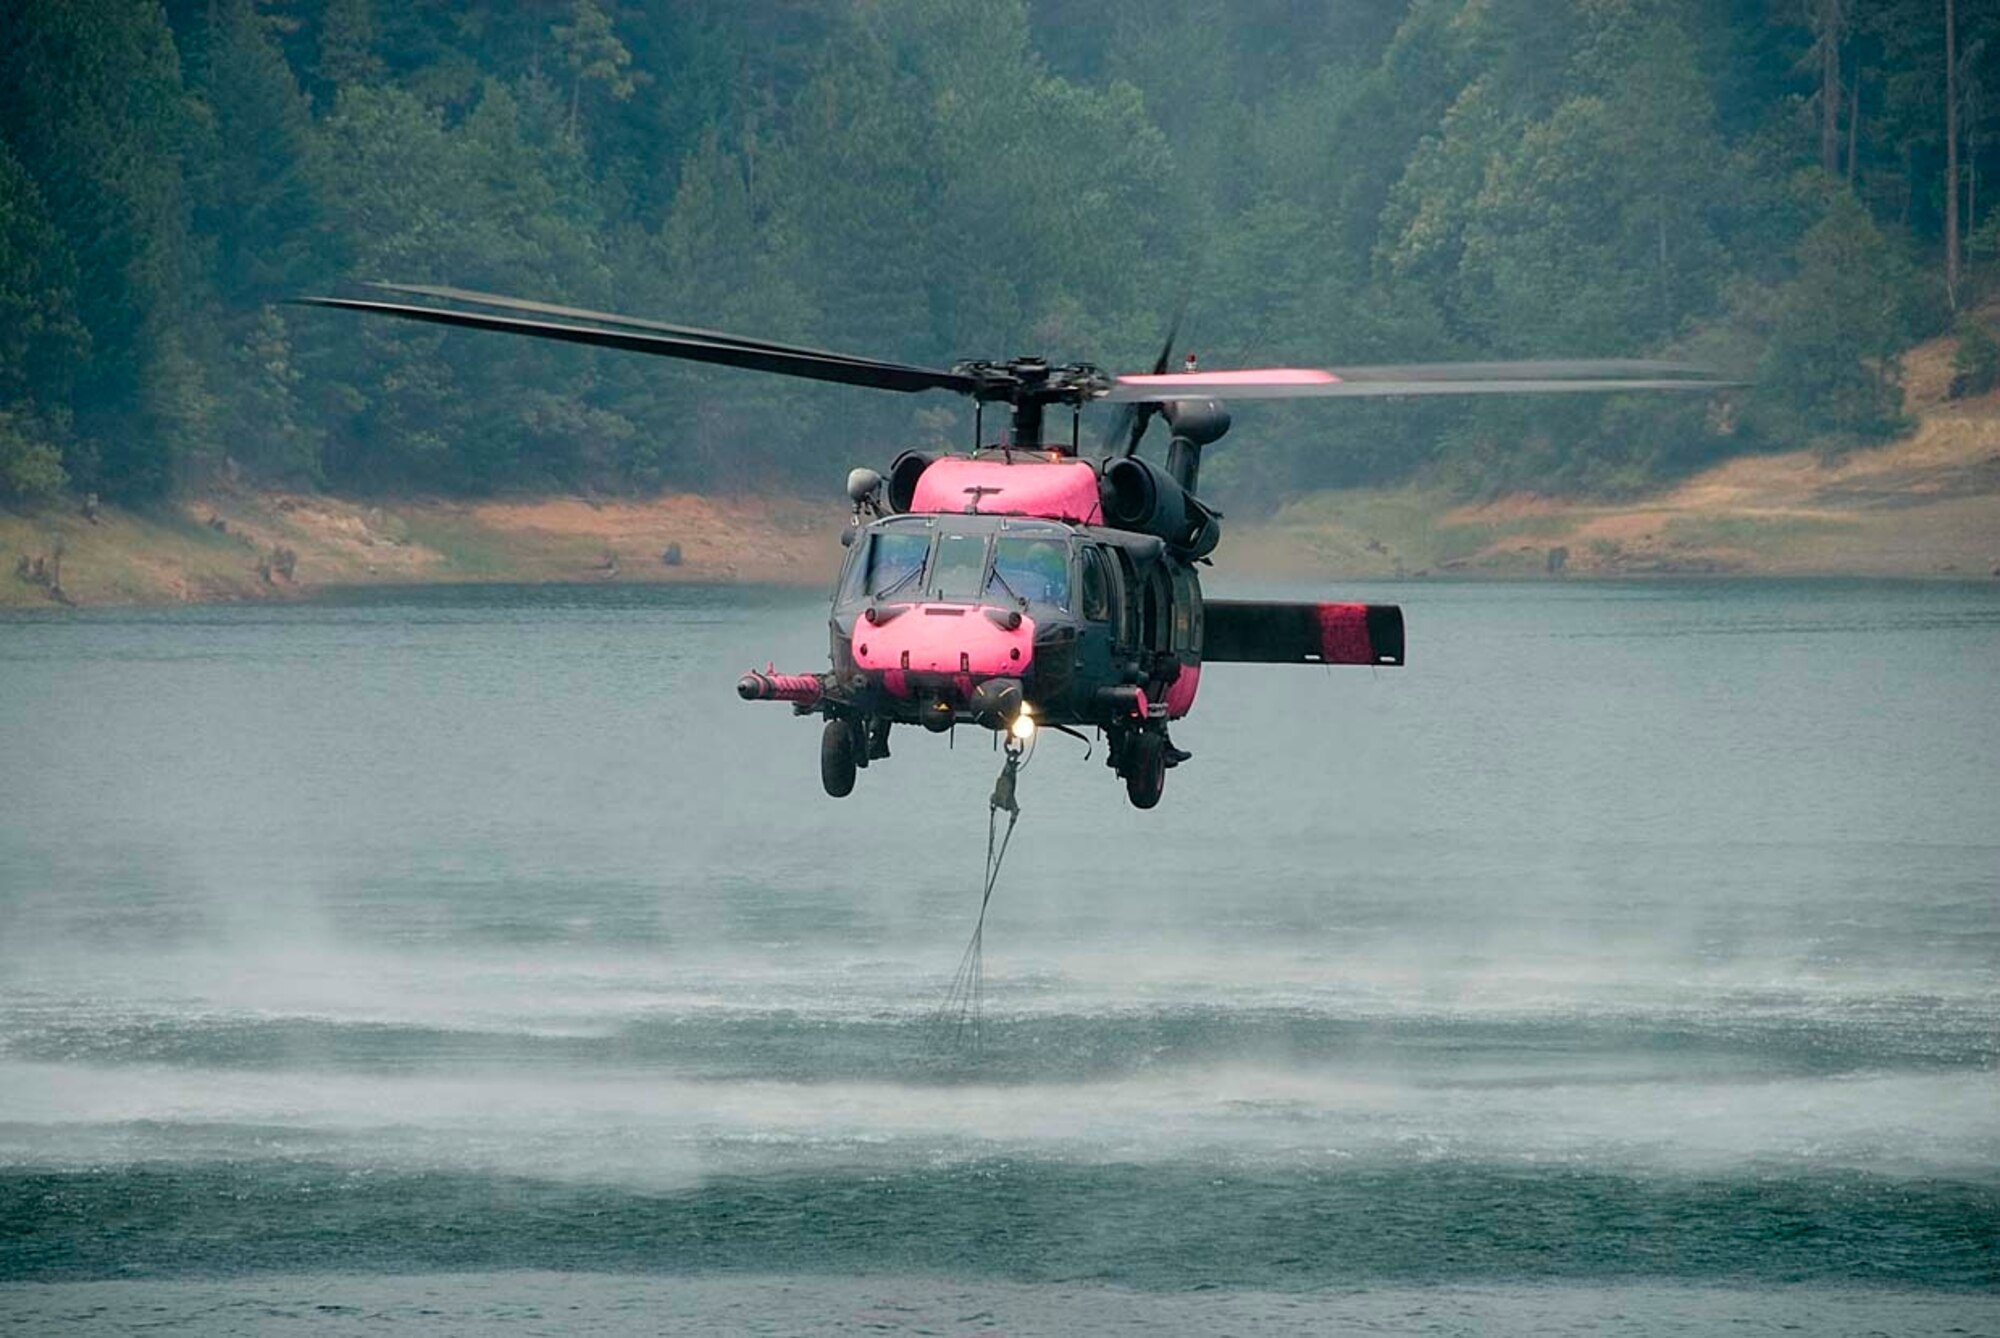 Jolly 92, an HH-60G Pave Hawk from the 129th Rescue Wing, a California Air National Guard unit based out of Moffett Federal Airfield near Mountain View, Calif., performs multiple water bucket missions over Butte County wildfires in California. The wing is the only unit in the Air Force qualified to participate in water bucket drops. There are currently 21 rotary-wing aircraft supporting the California wild fires, nine aircraft from other states. (U.S. Air Force photo by Staff Sgt. Andrew Hughan) 